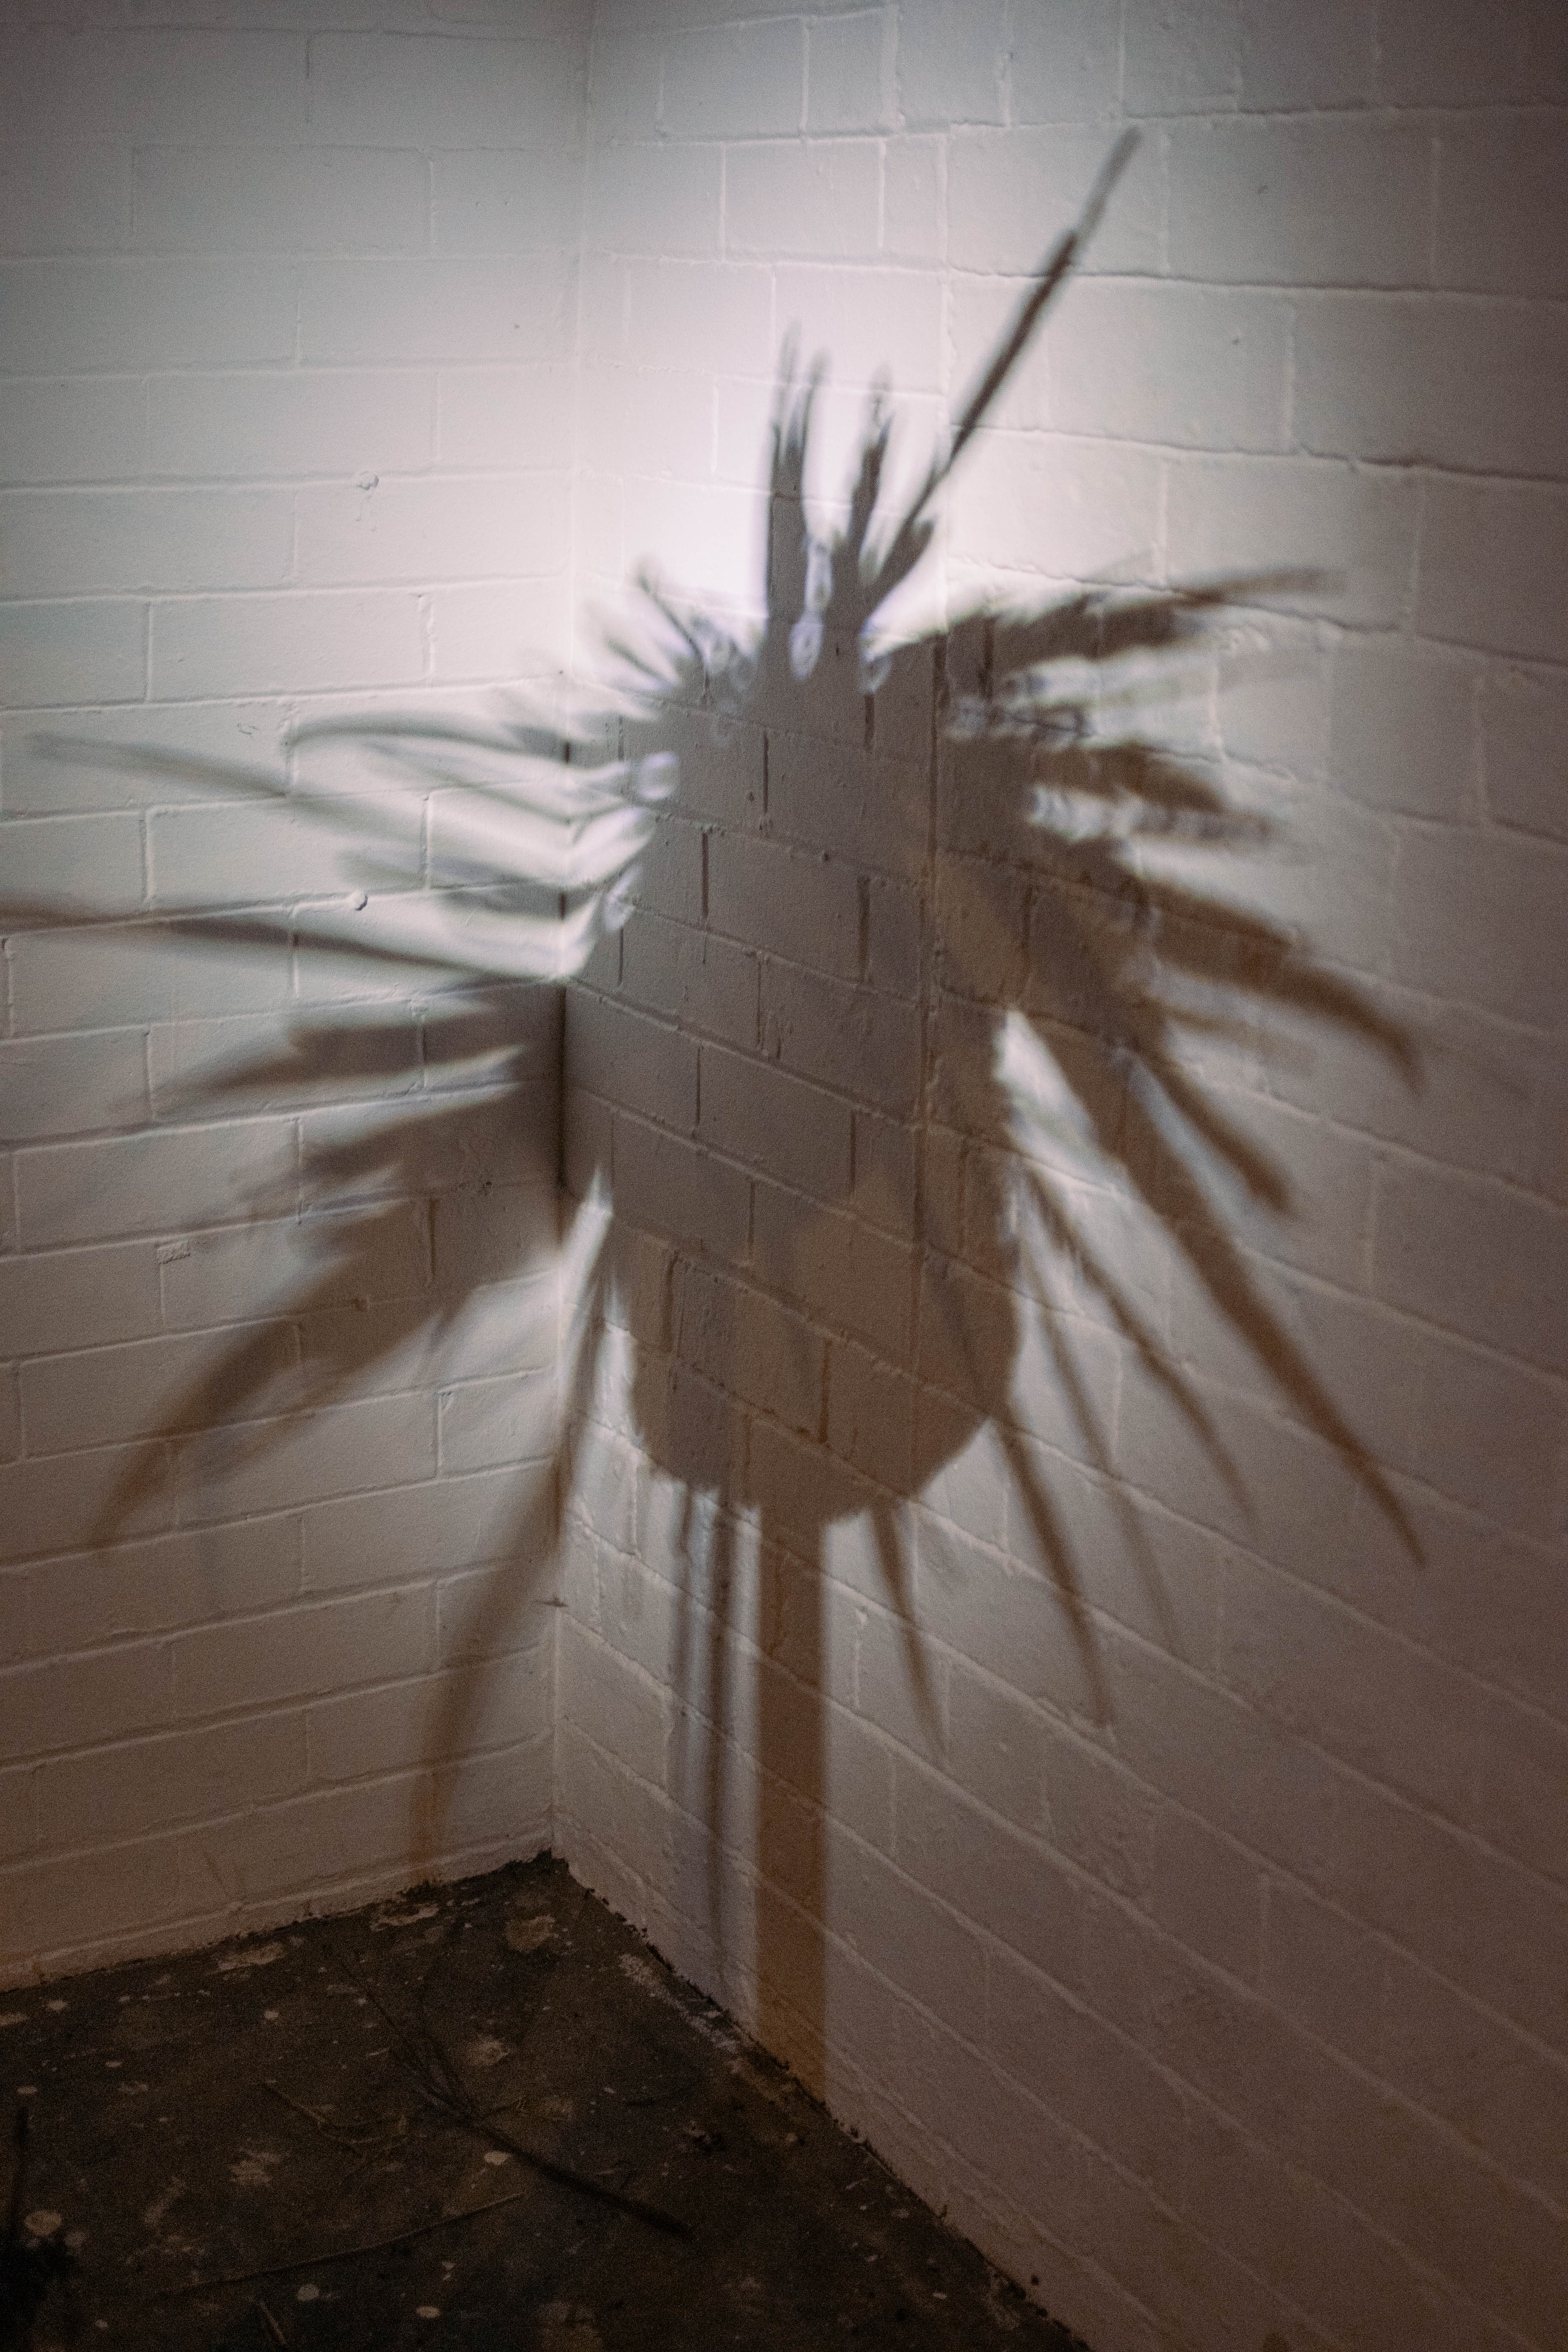 A silhouette of a sculpture is seen against a white wall, with a bright light creating it.